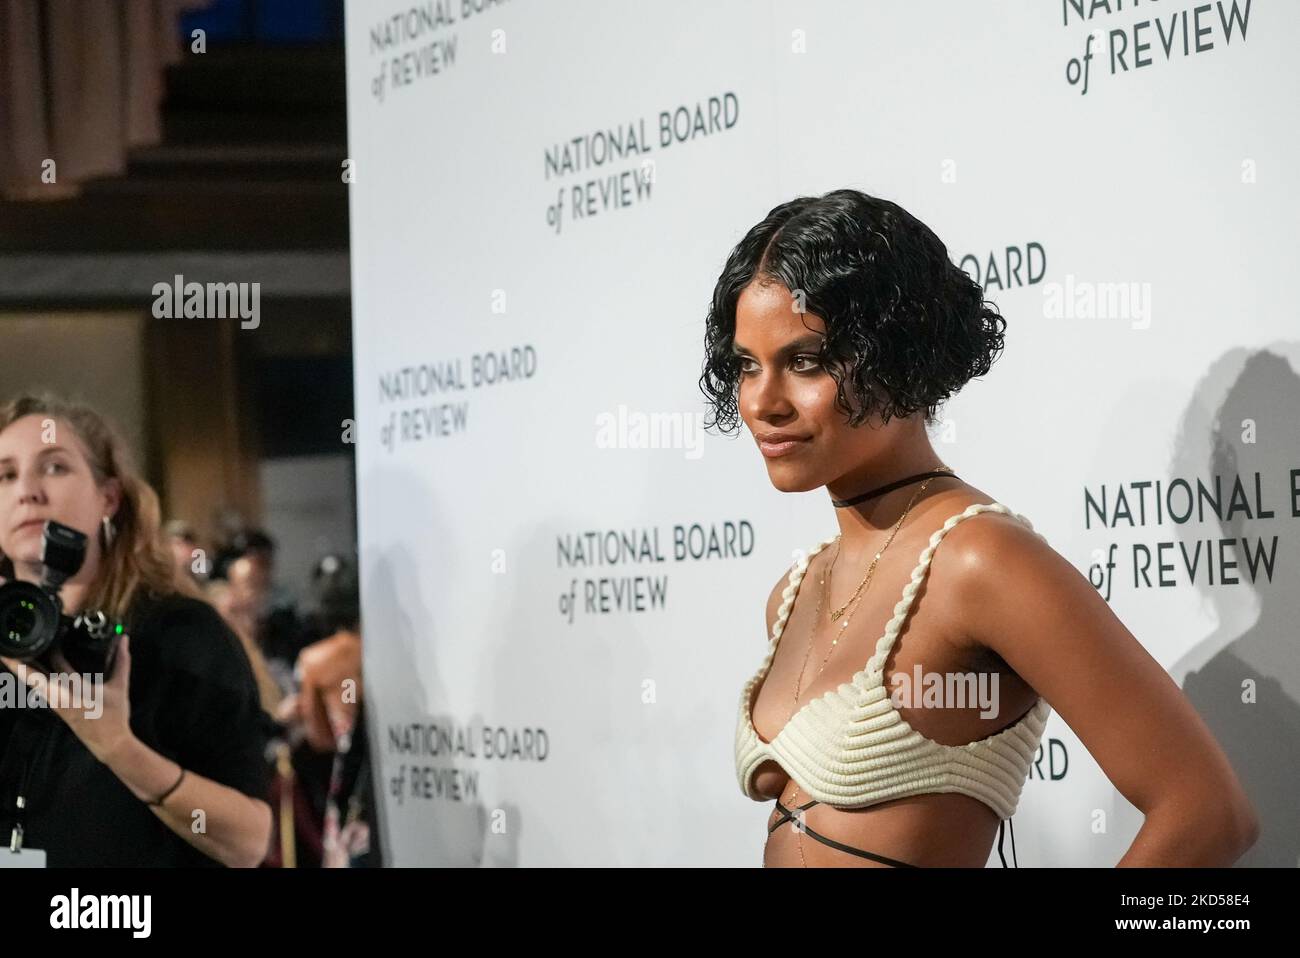 https://c8.alamy.com/comp/2KD58E4/zazie-beetz-attends-the-national-board-of-review-annual-awards-gala-at-cipriani-42nd-street-on-march-15-2022-in-new-york-city-photo-by-john-nacionnurphoto-2KD58E4.jpg